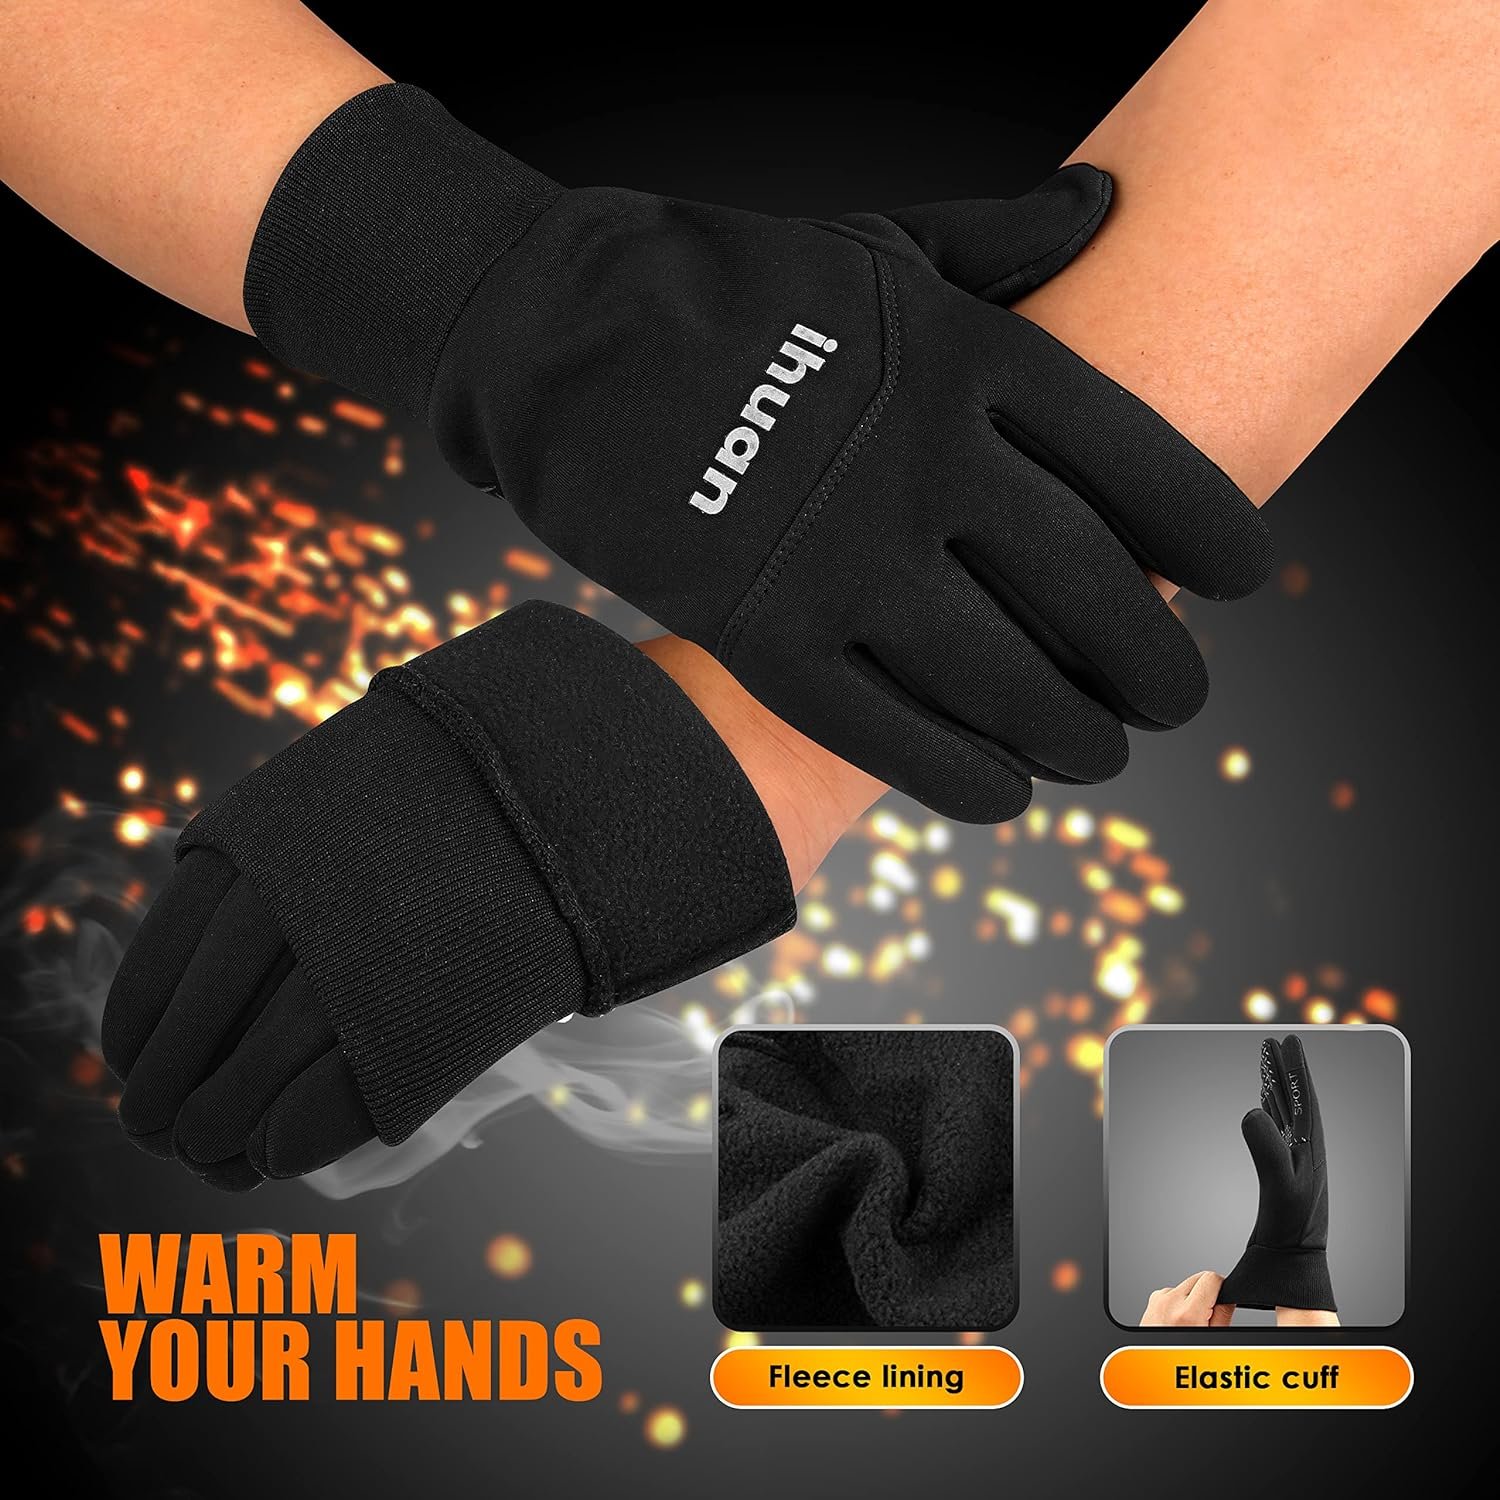 ihuan Winter Gloves Review